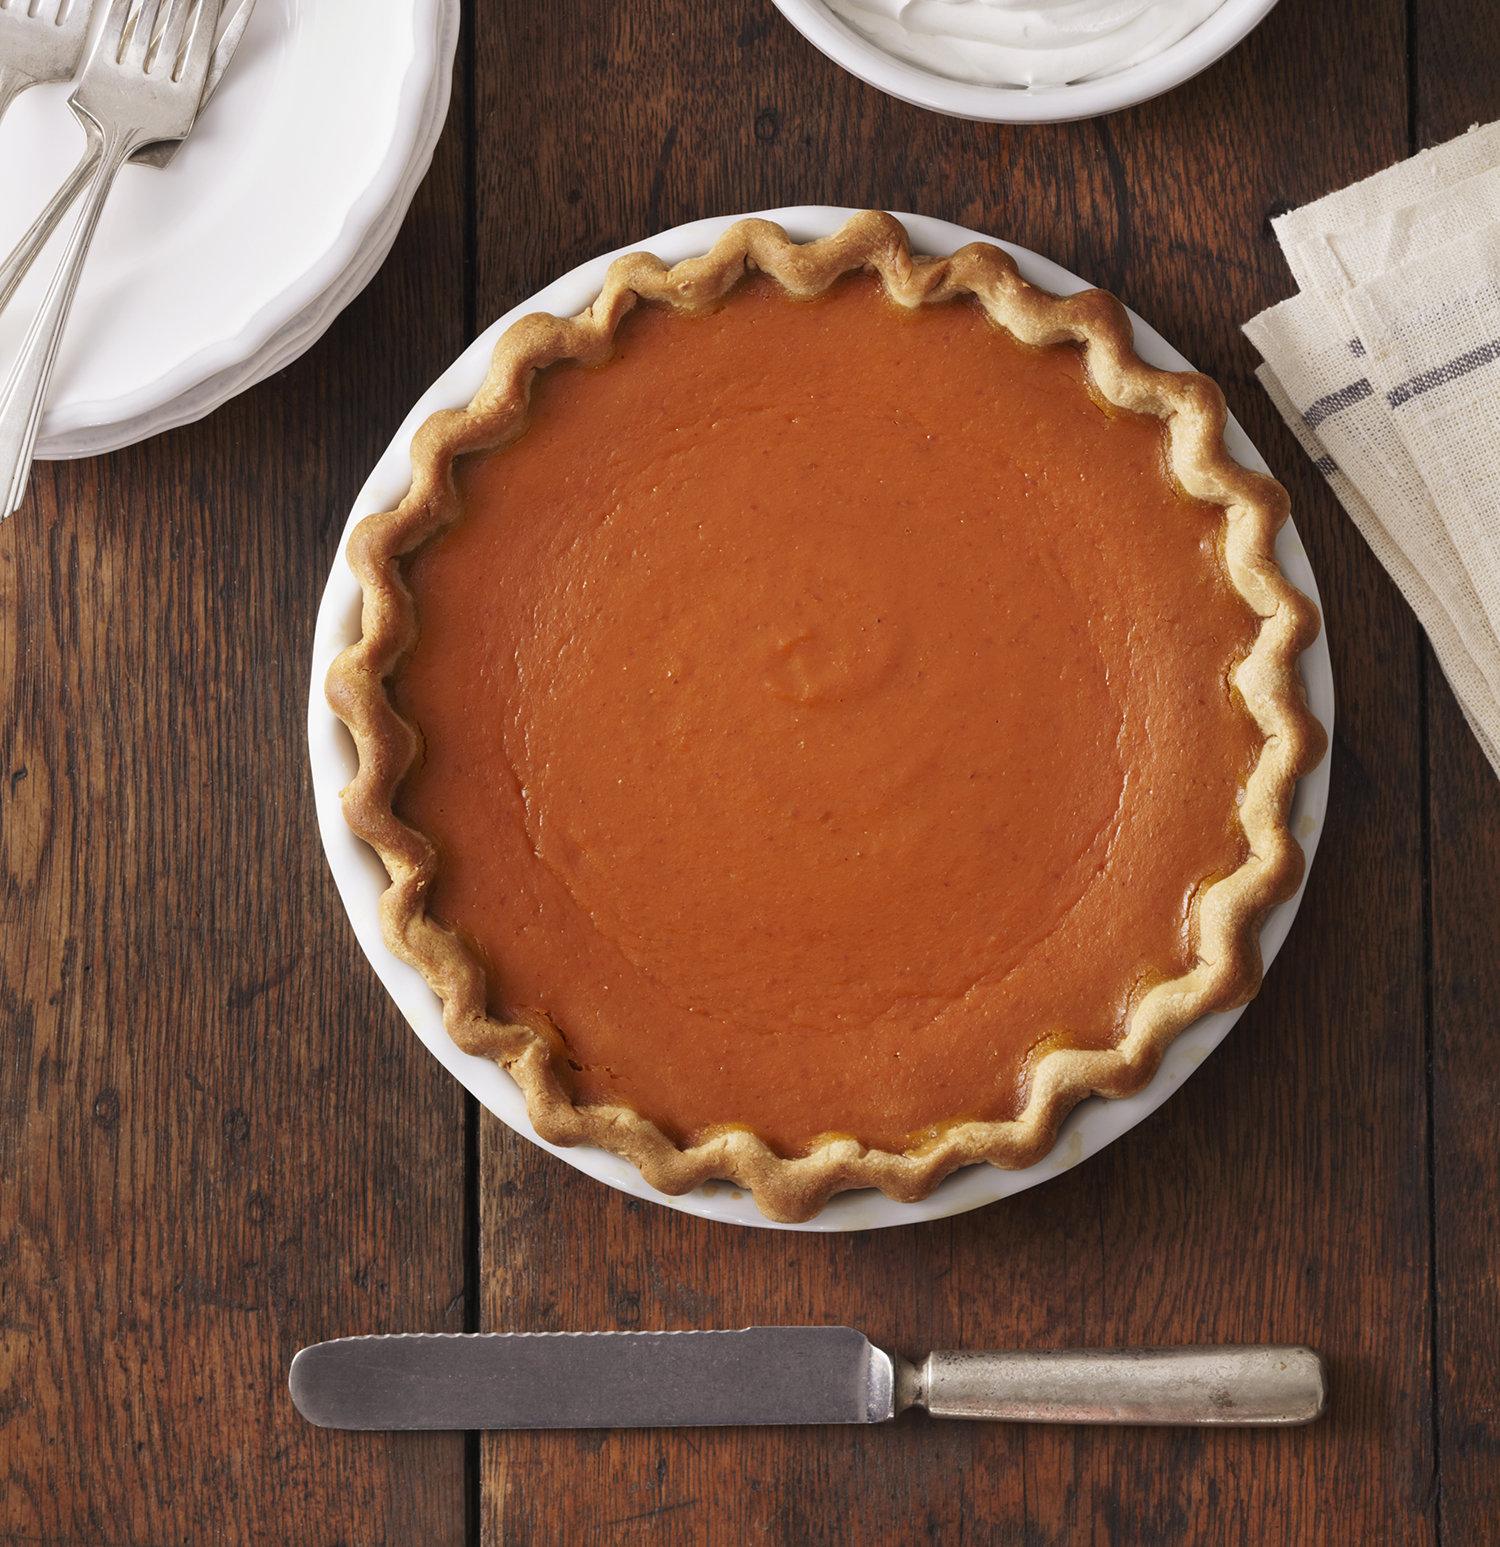 How Long Can Pumpkin Pie Sit Out?